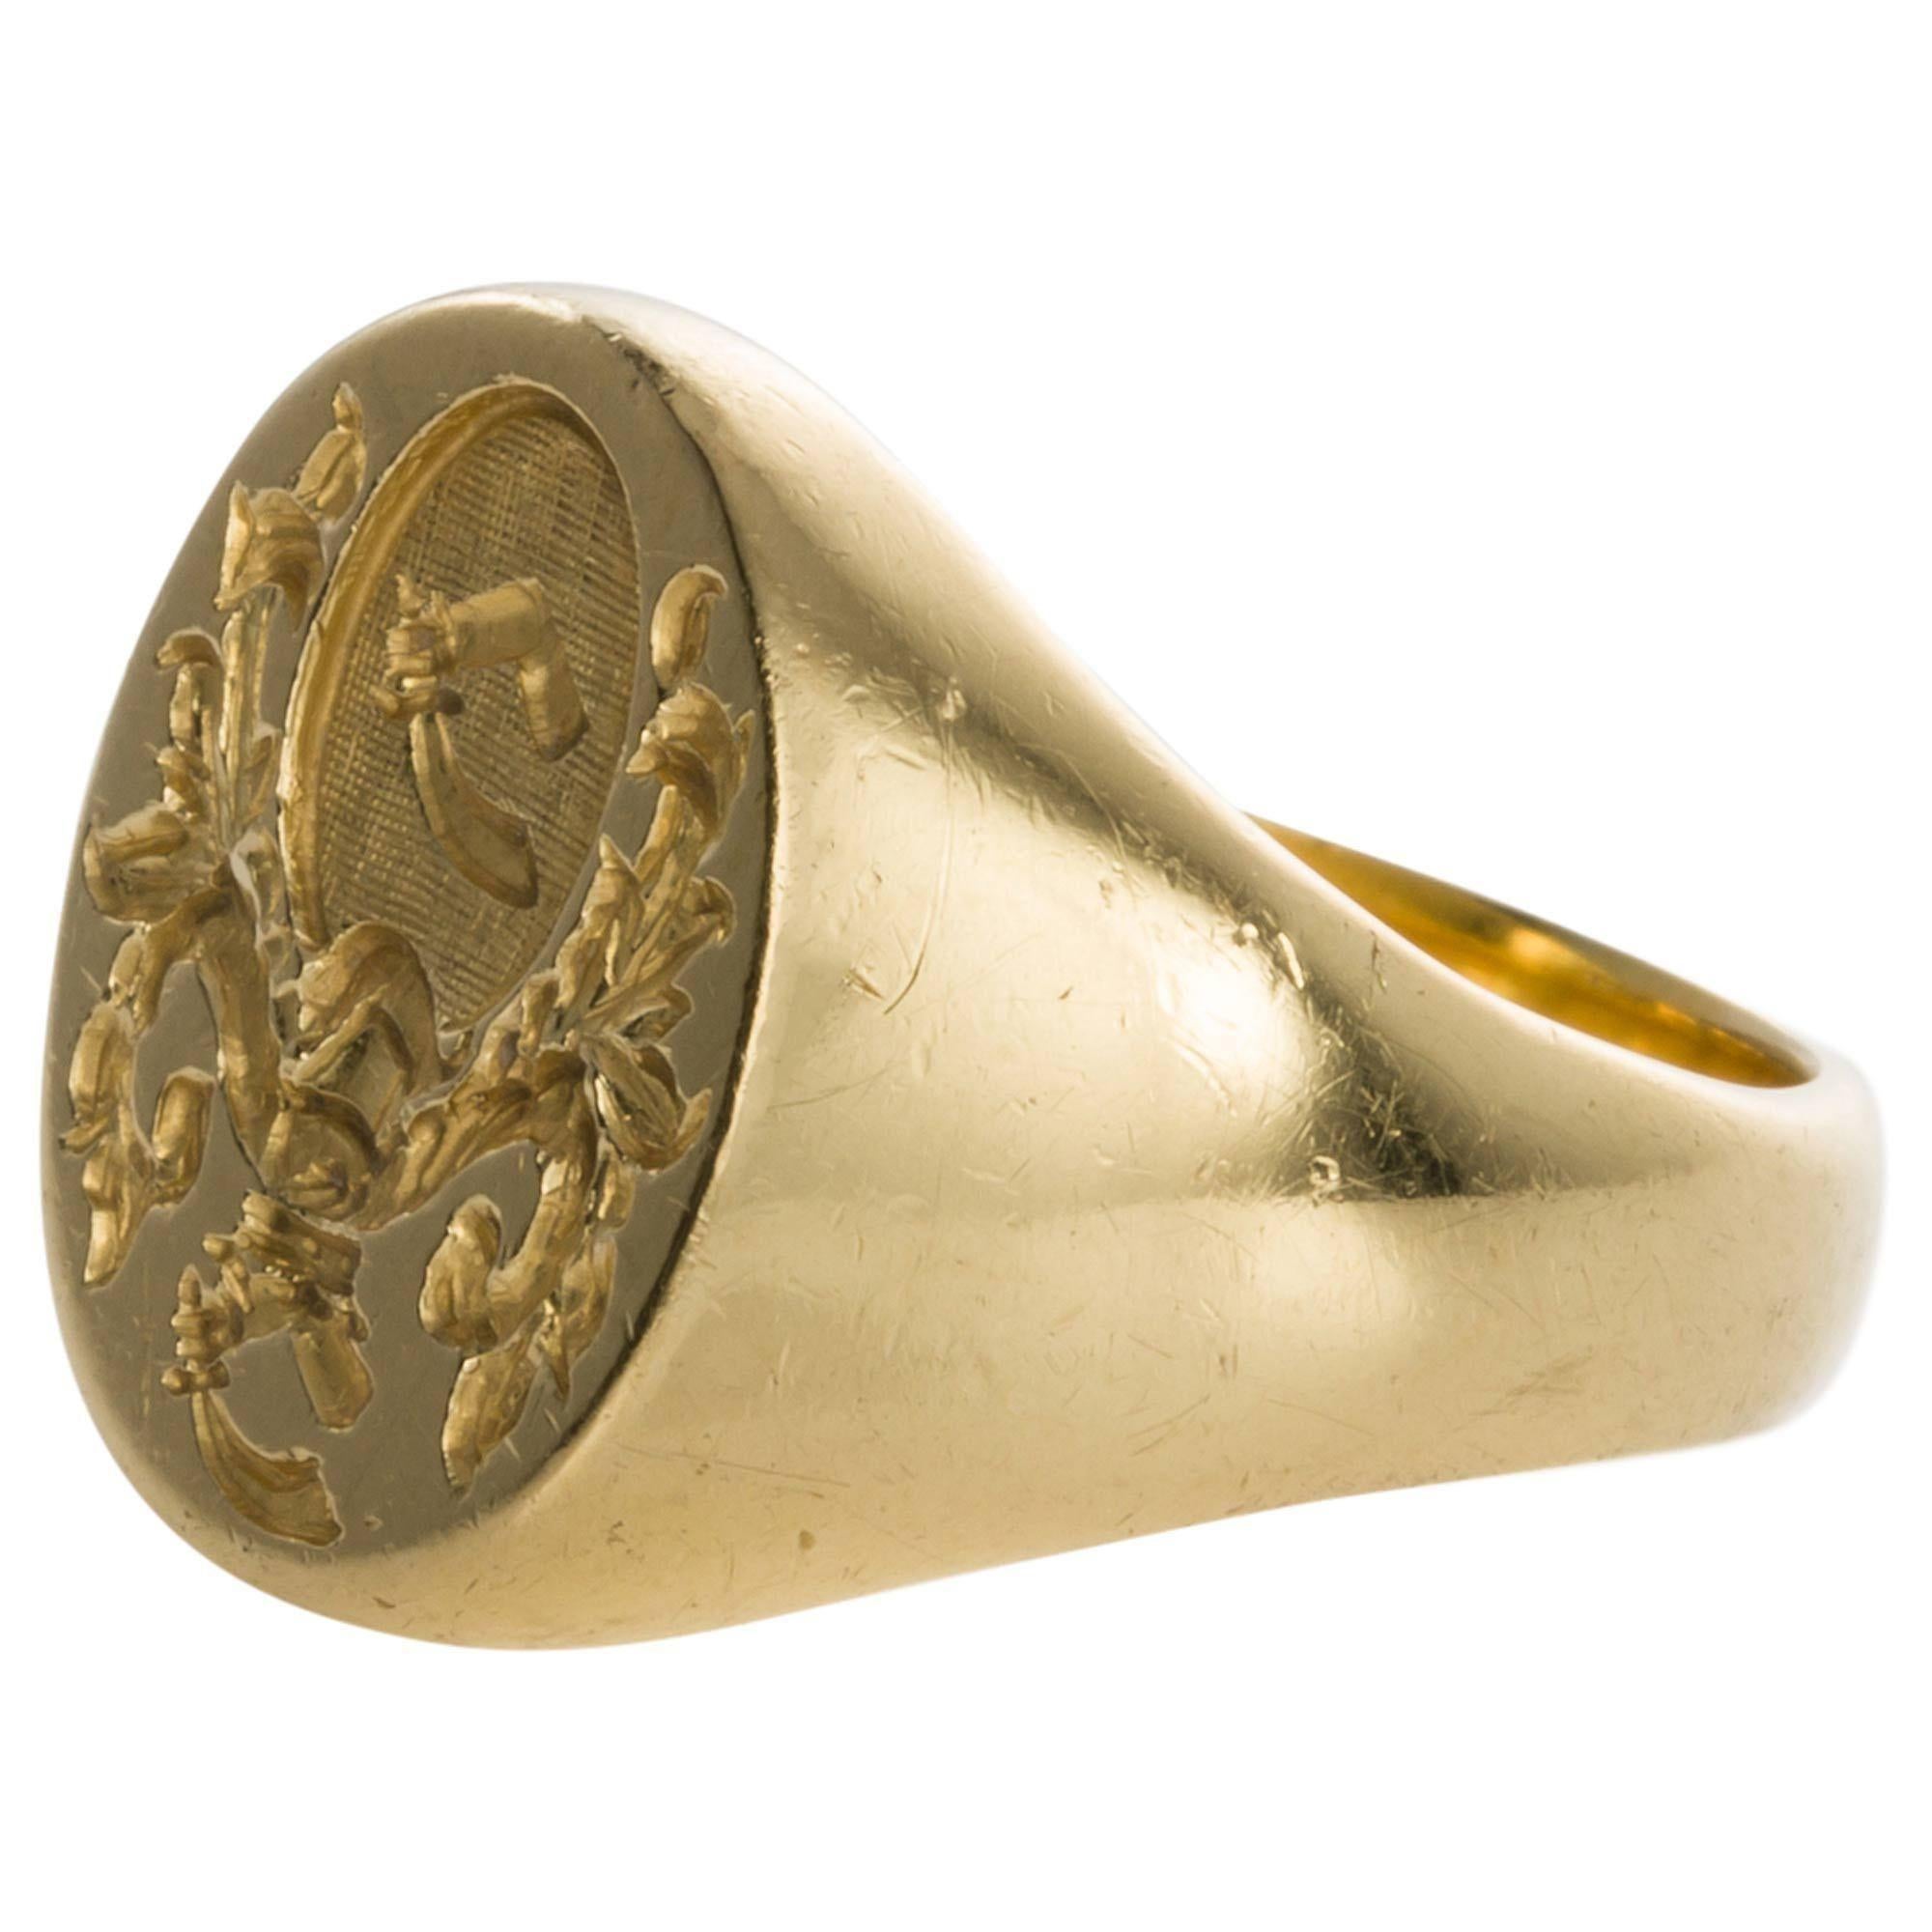 Signet rings have been fashionable since medieval times, signifying status within the community. Mostly gents wore these rings, sometimes with gemstones encrusted into the gold and sometimes showcasing the family crest. Big, bold rings of this style